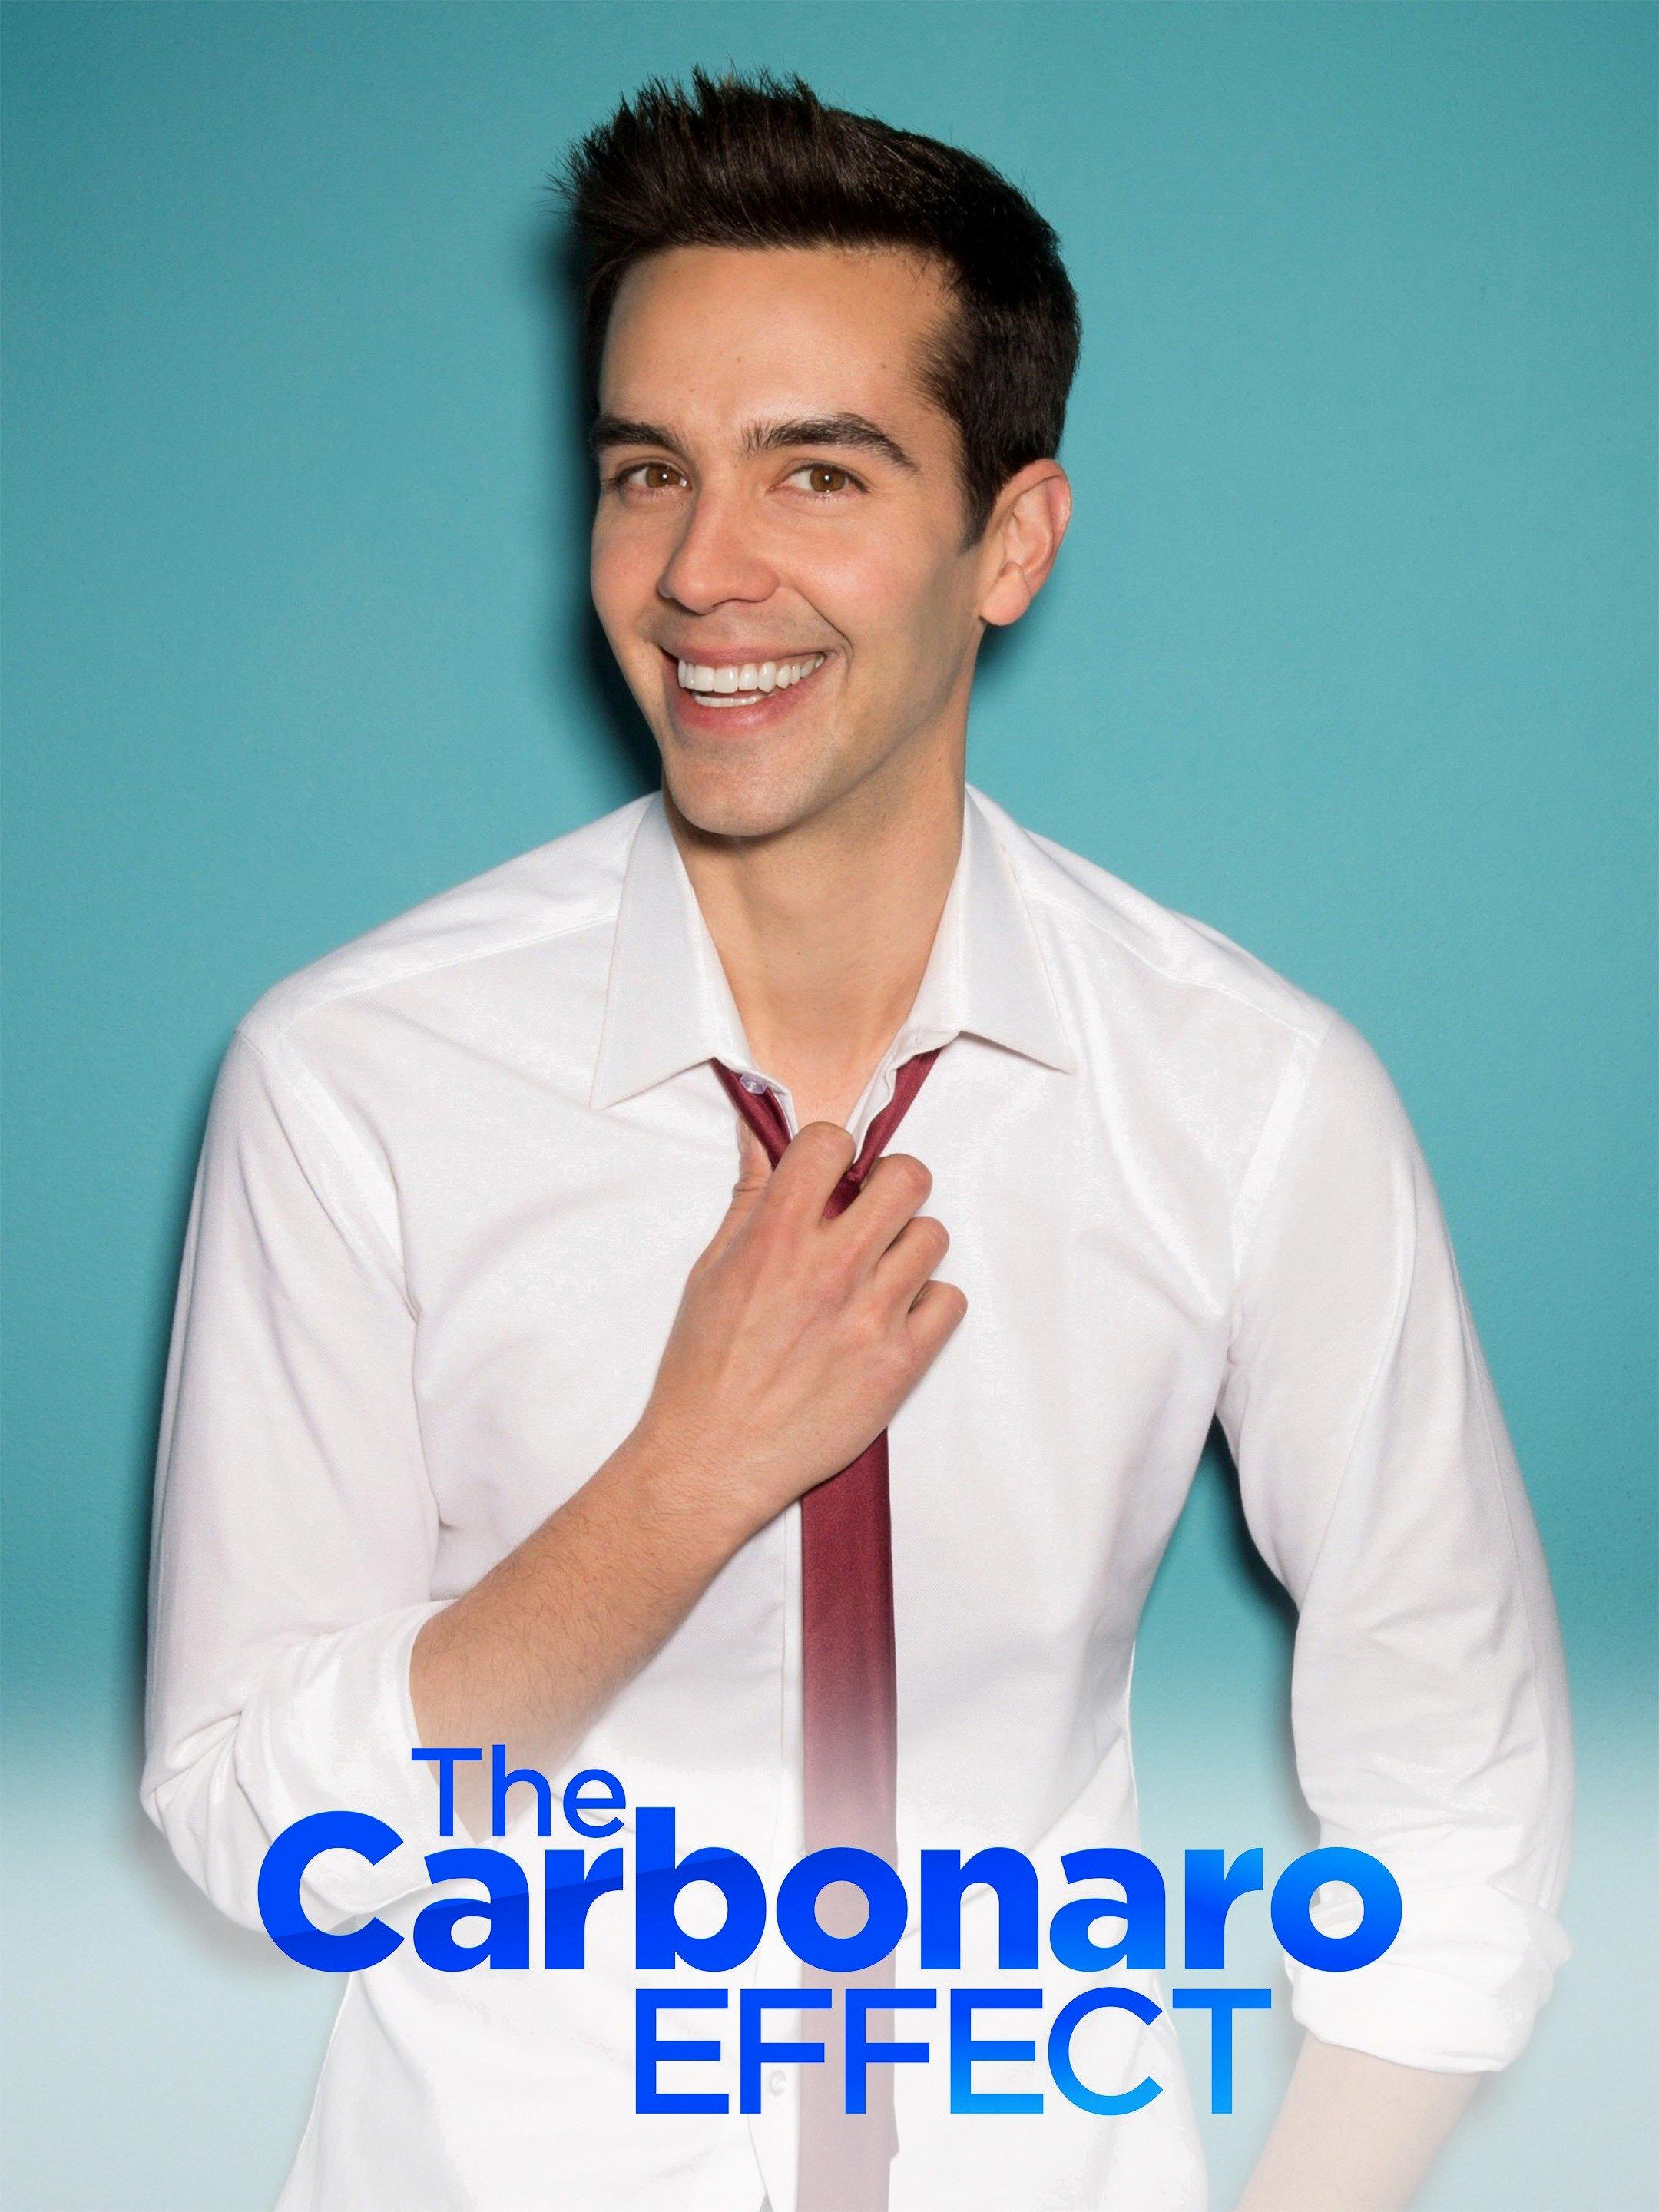 is the carbonaro effect real